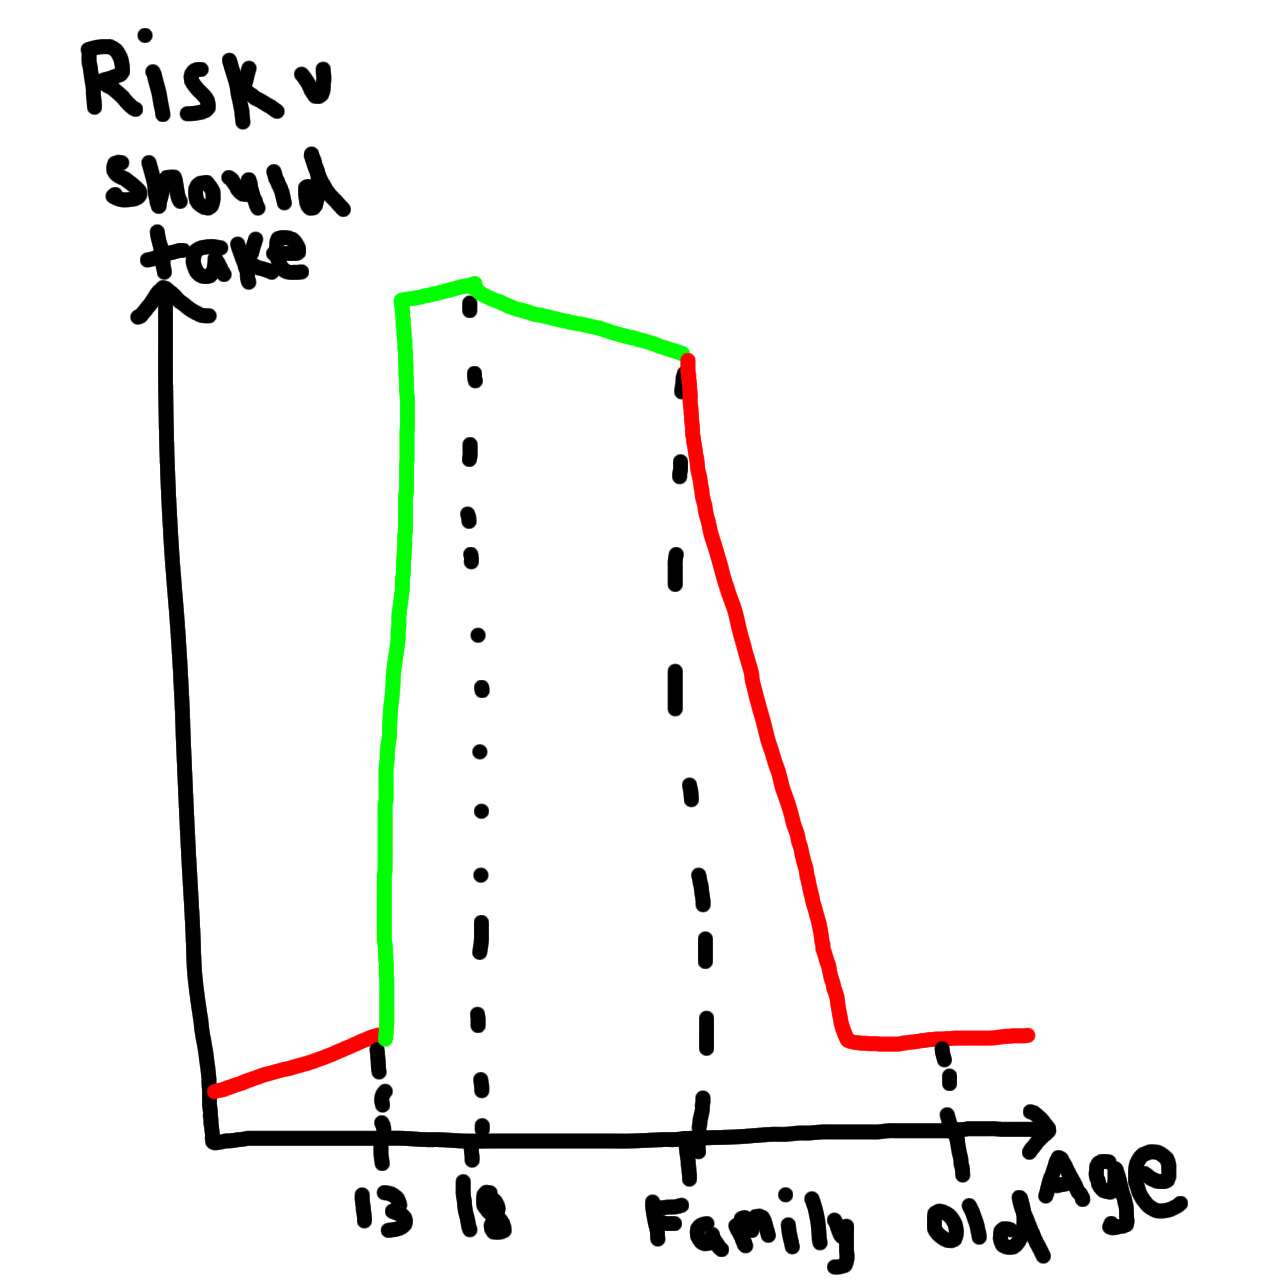 Thoughts on risk